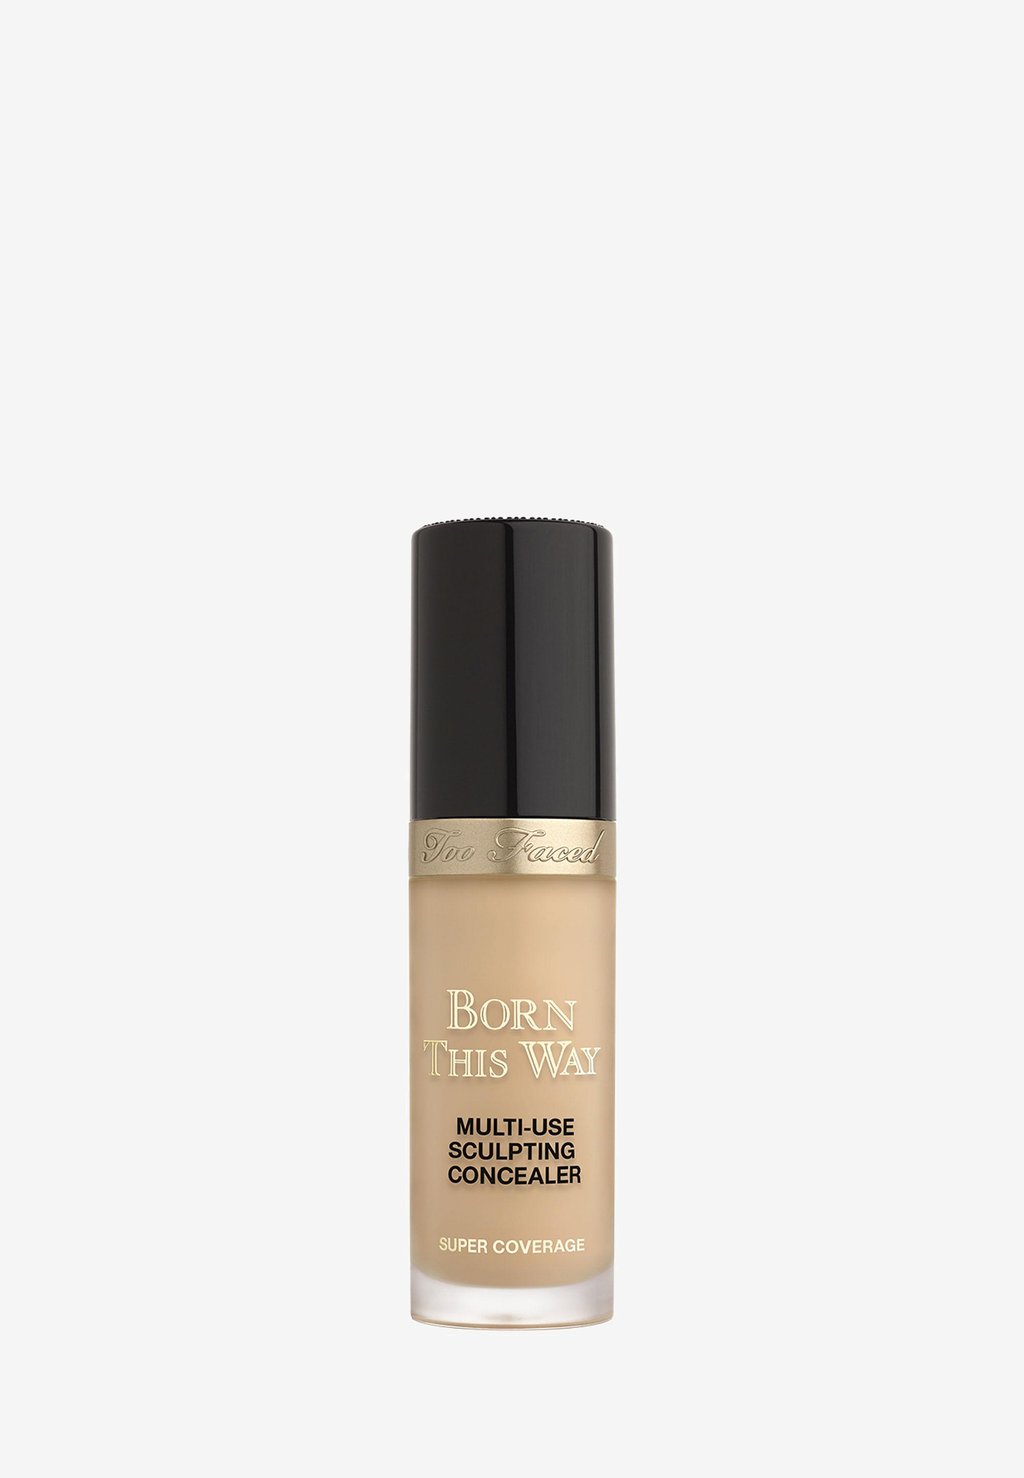 Консилер BORN THIS WAY SUPER COVERAGE CONCEALER Too Faced, цвет warm beige too faced born this way super coverage multi use sculpting concealer golden beige